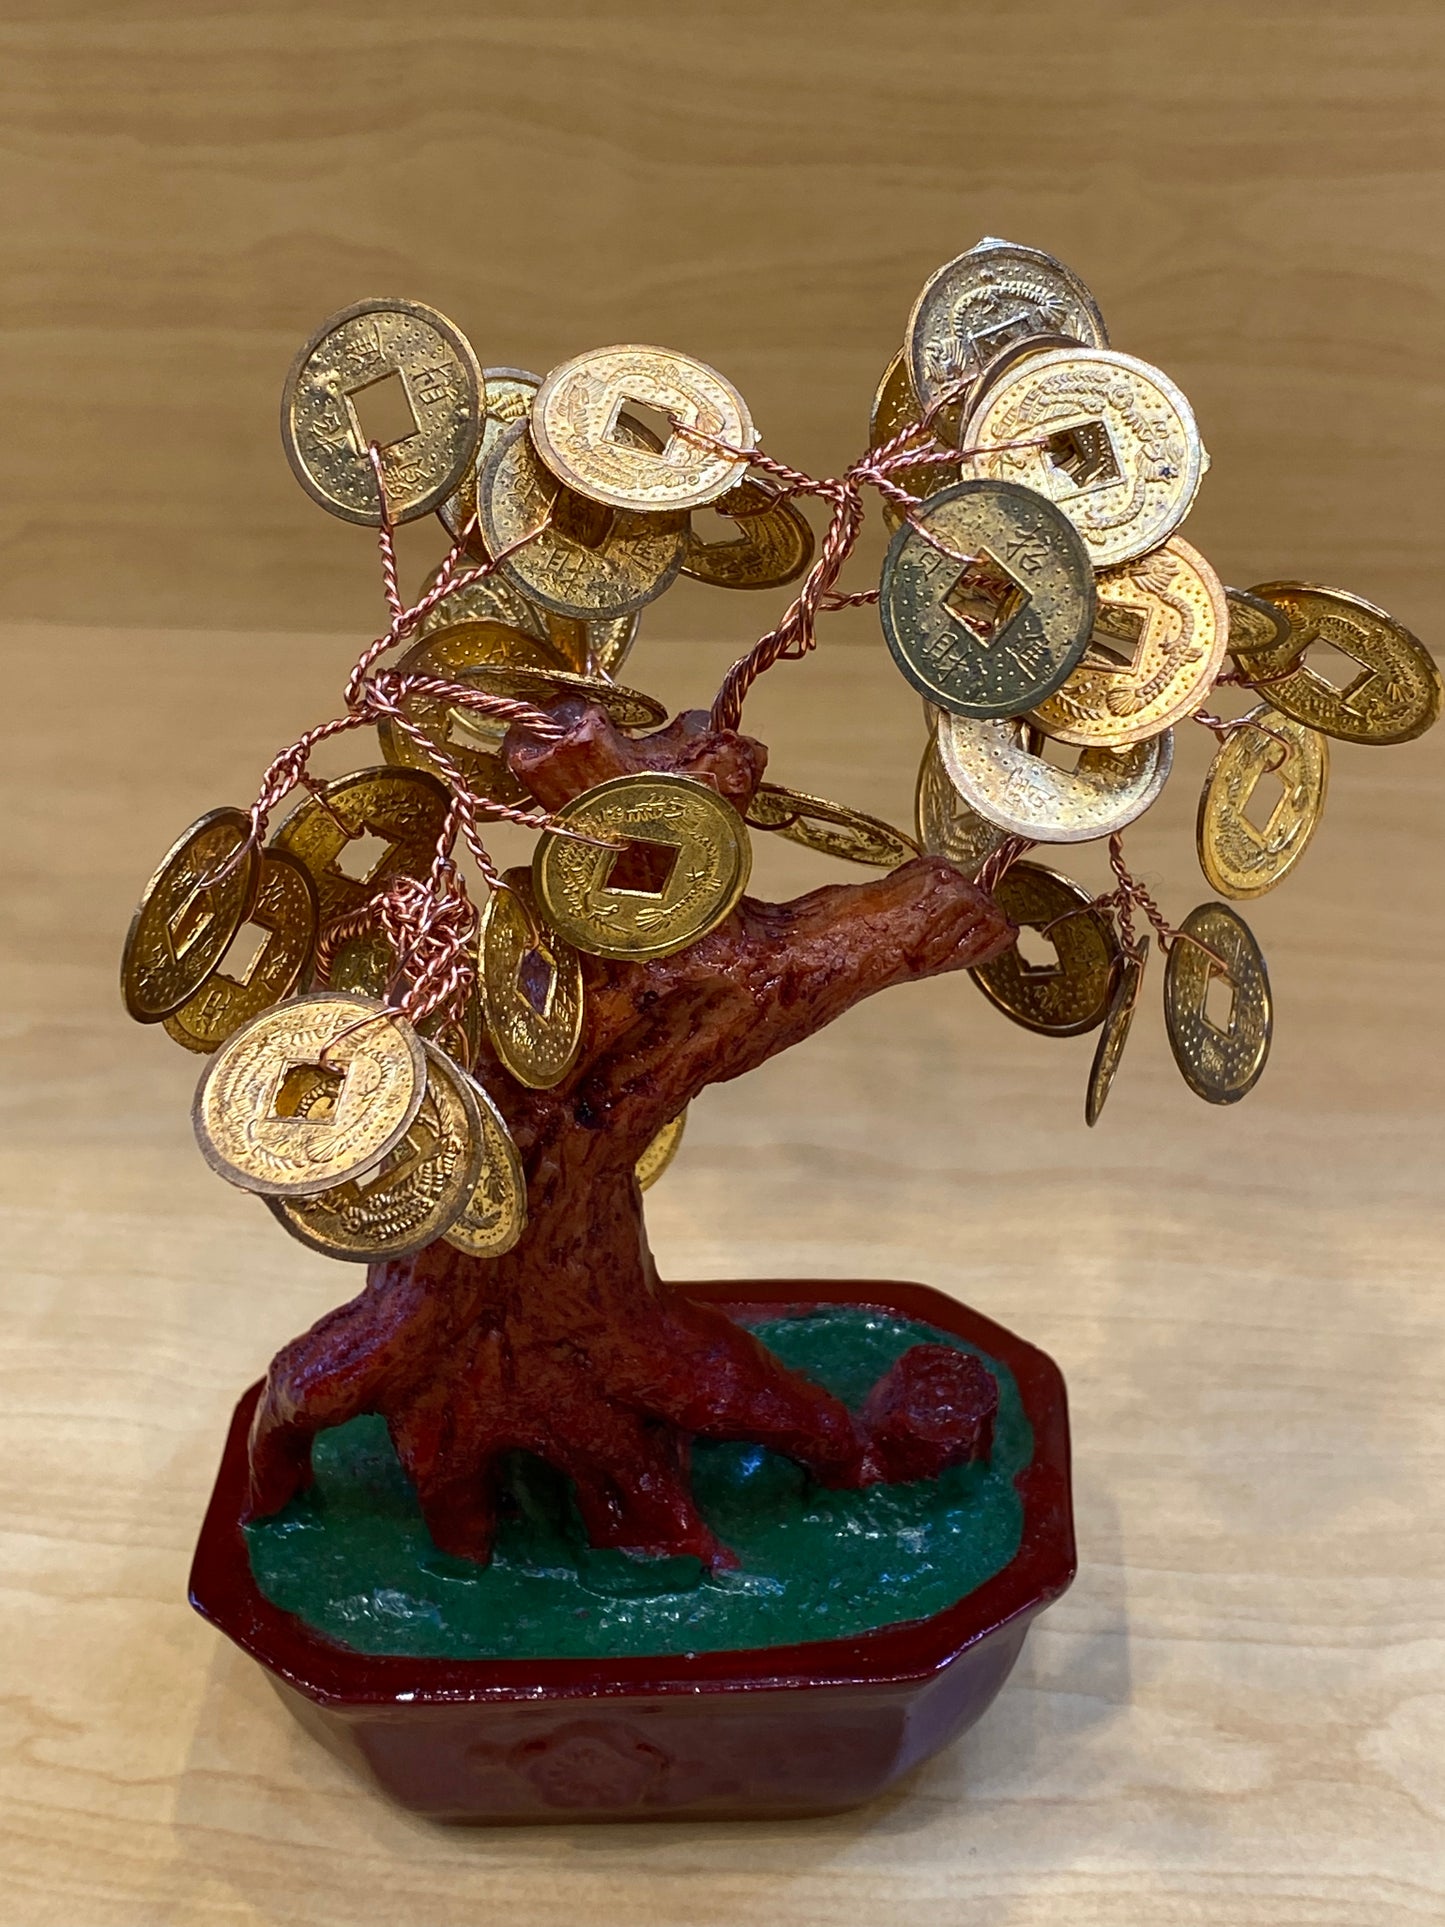 Feng Shui Bonsai Money Coin Tree on Red Tub